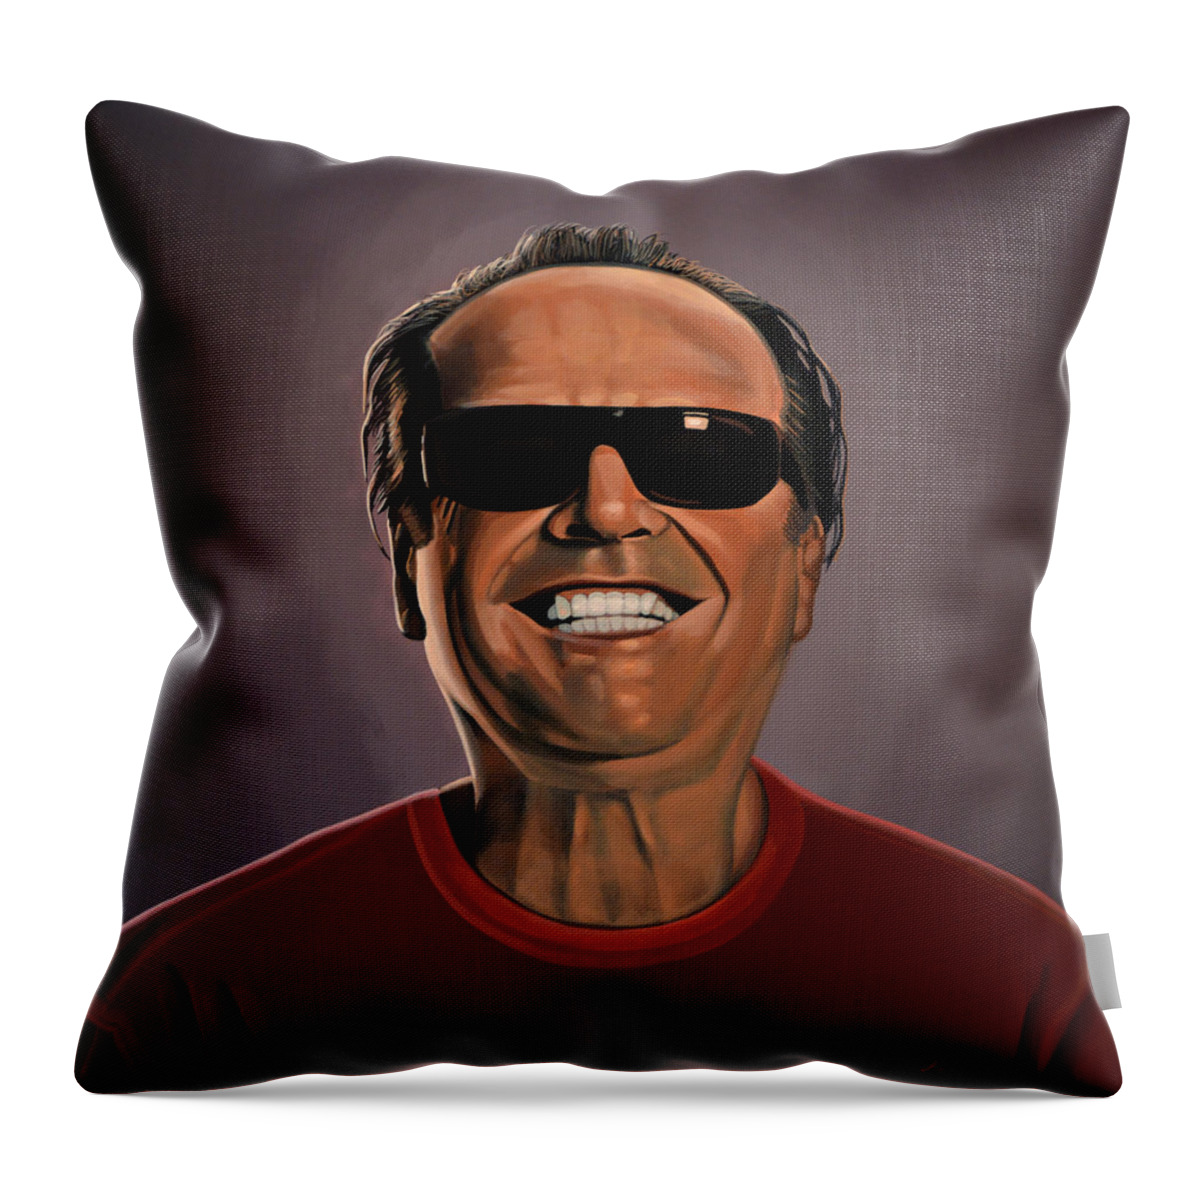 Jack Nicholson Throw Pillow featuring the painting Jack Nicholson 2 by Paul Meijering